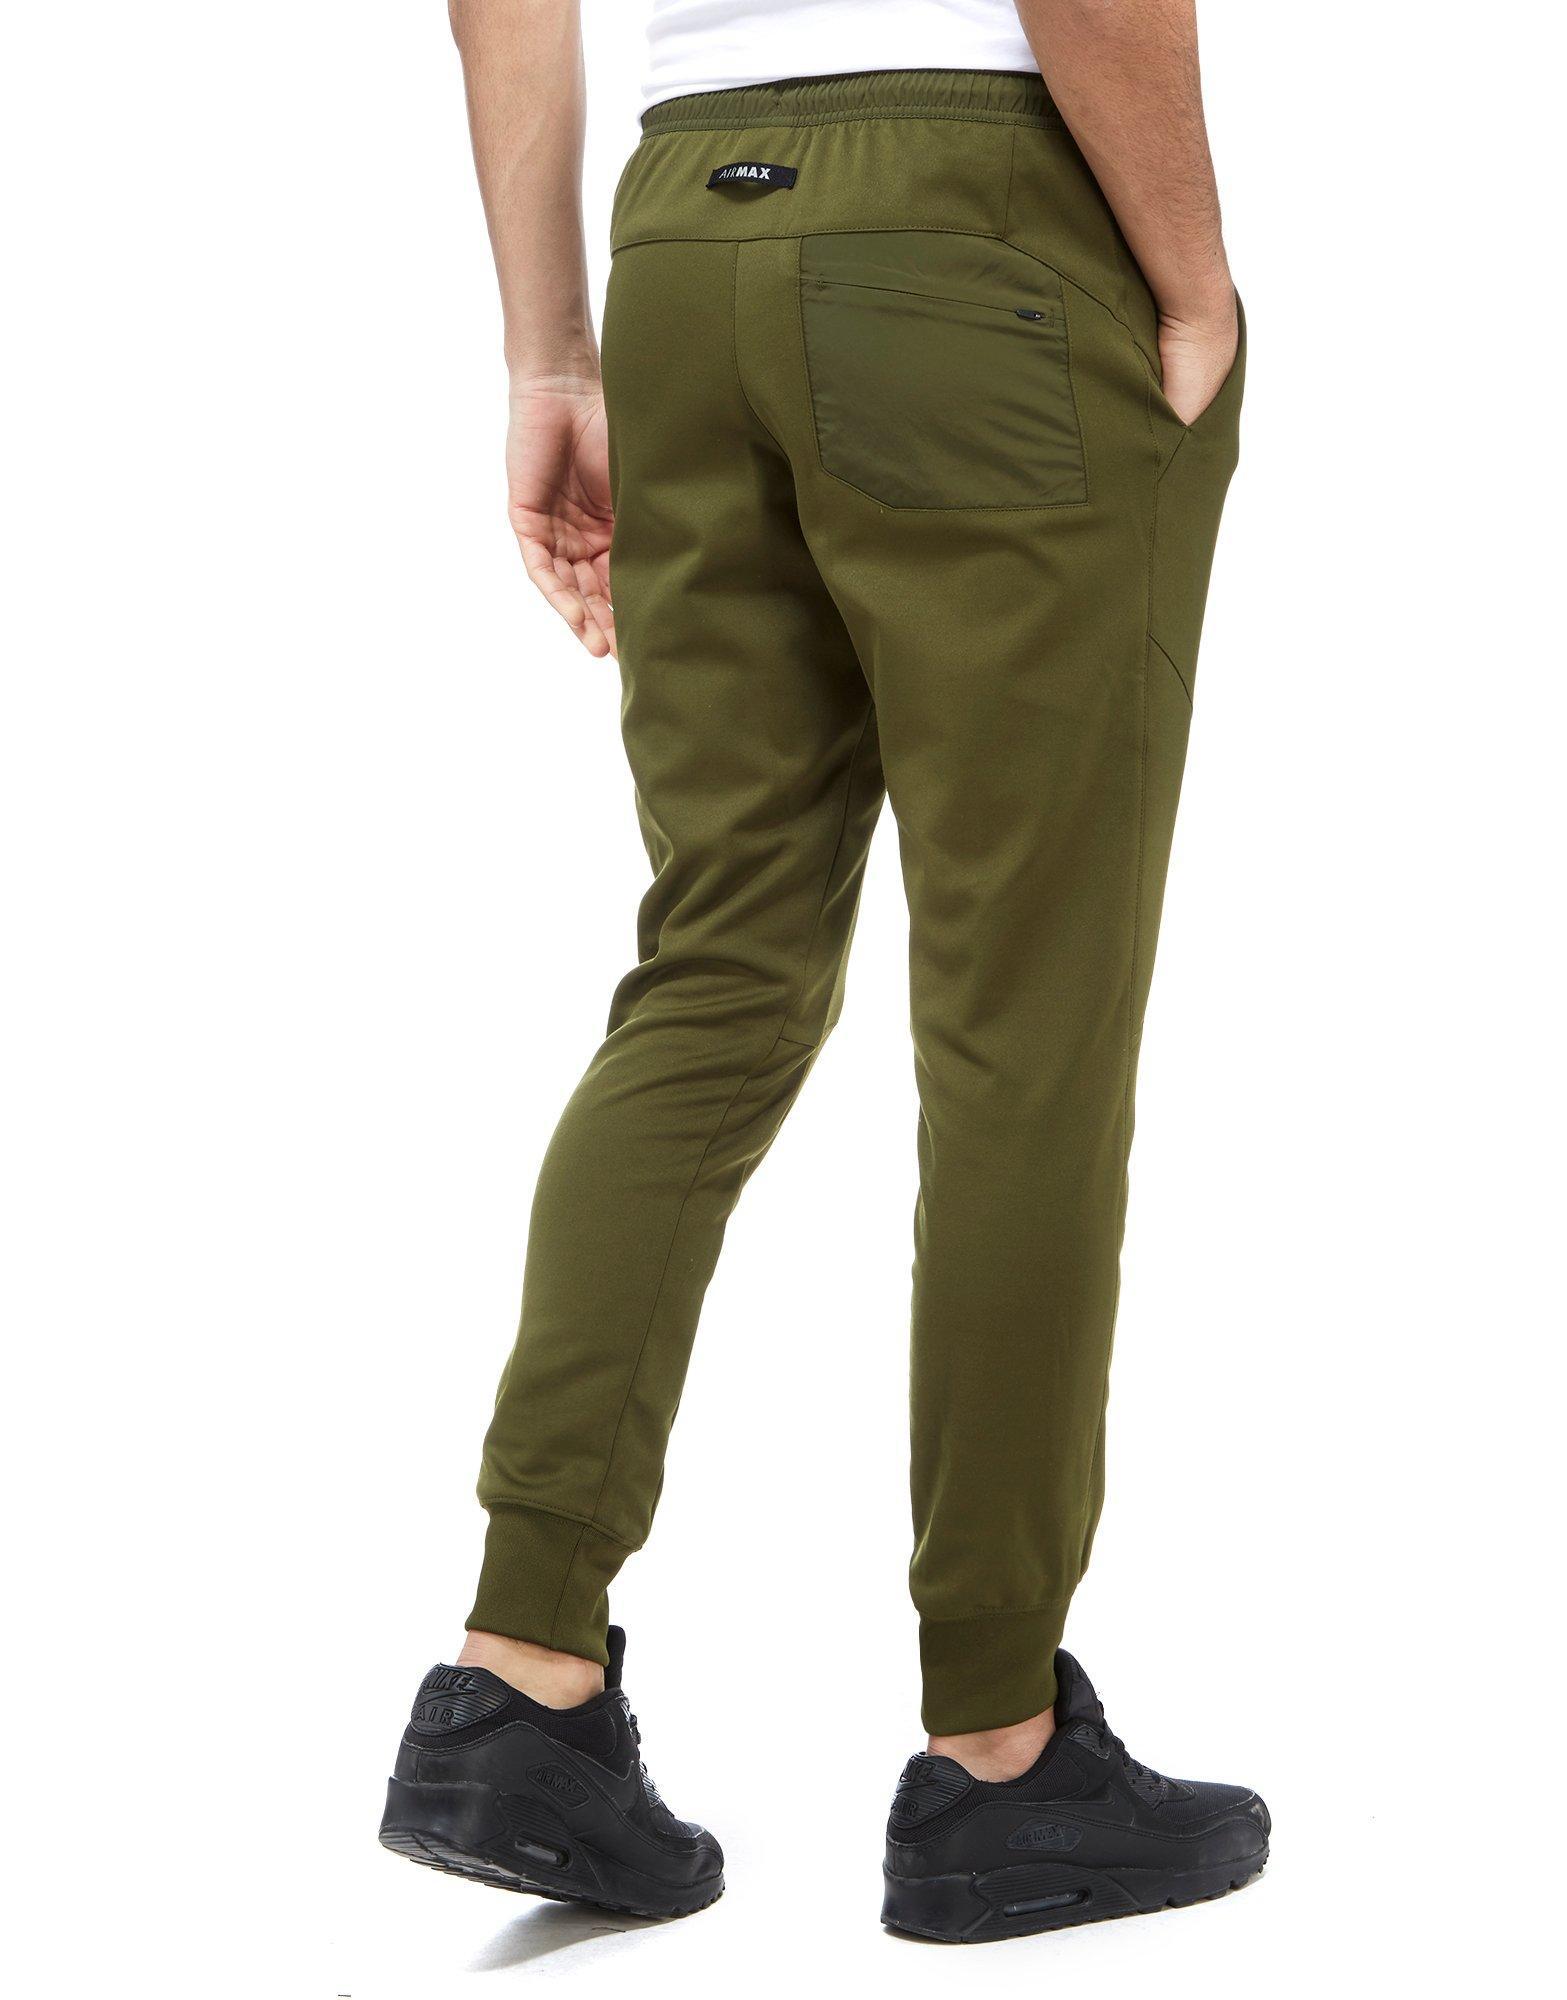 Nike Synthetic Air Max Poly Track Pants in Green for Men - Lyst